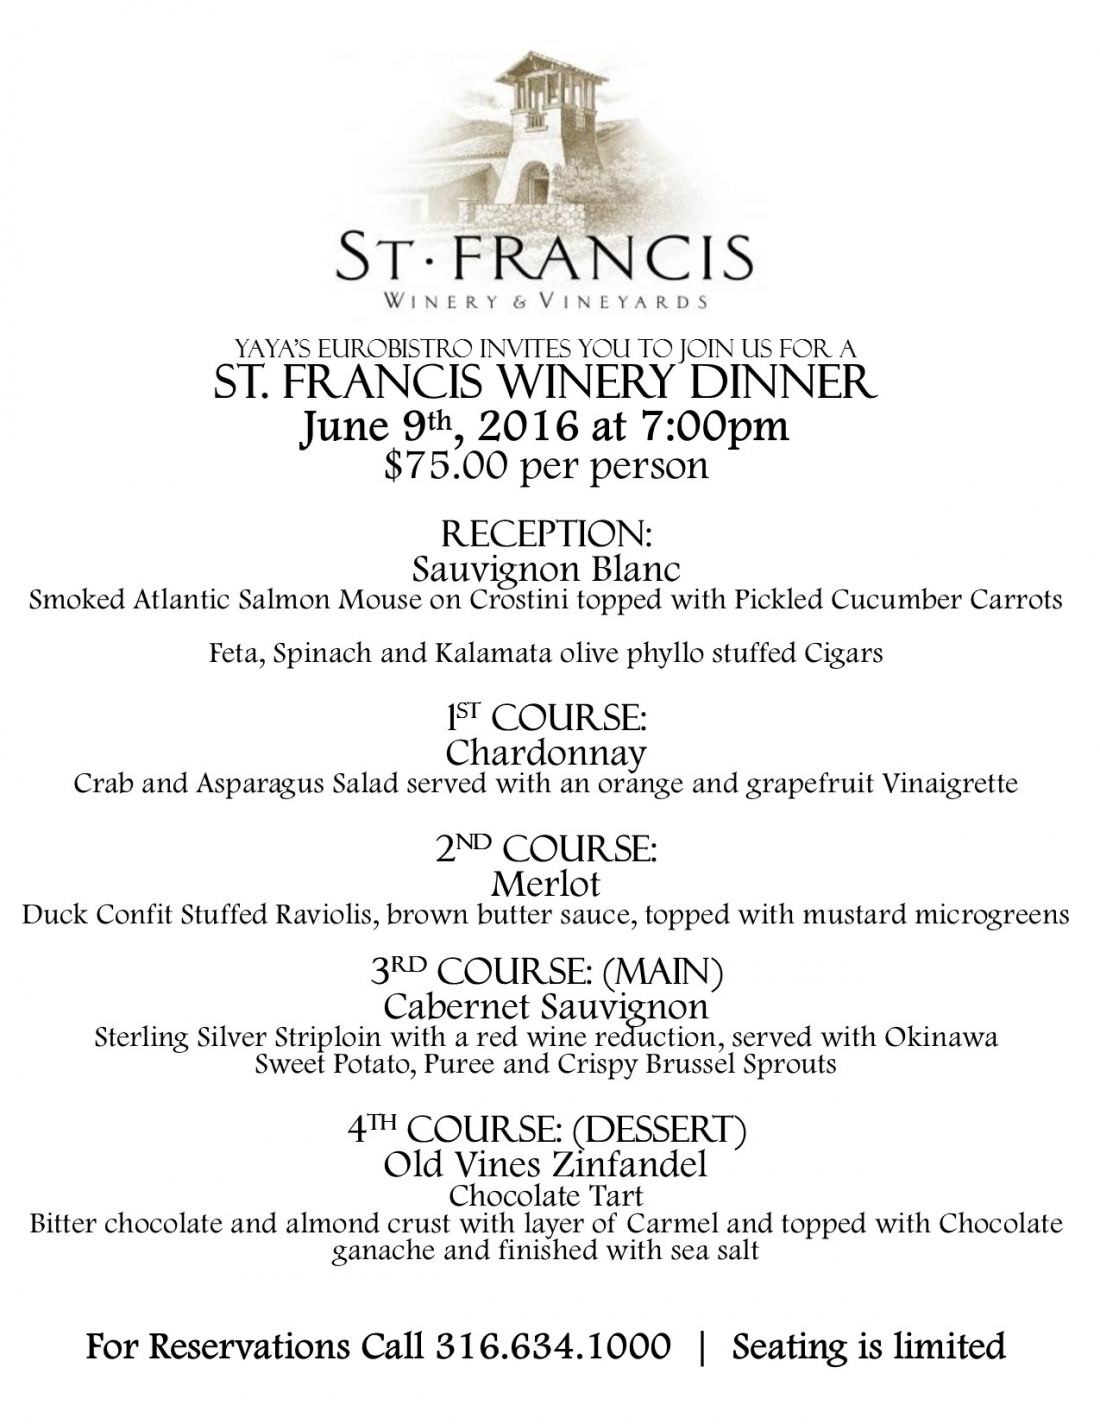 St. Francis Winery Dinner is June 9th!